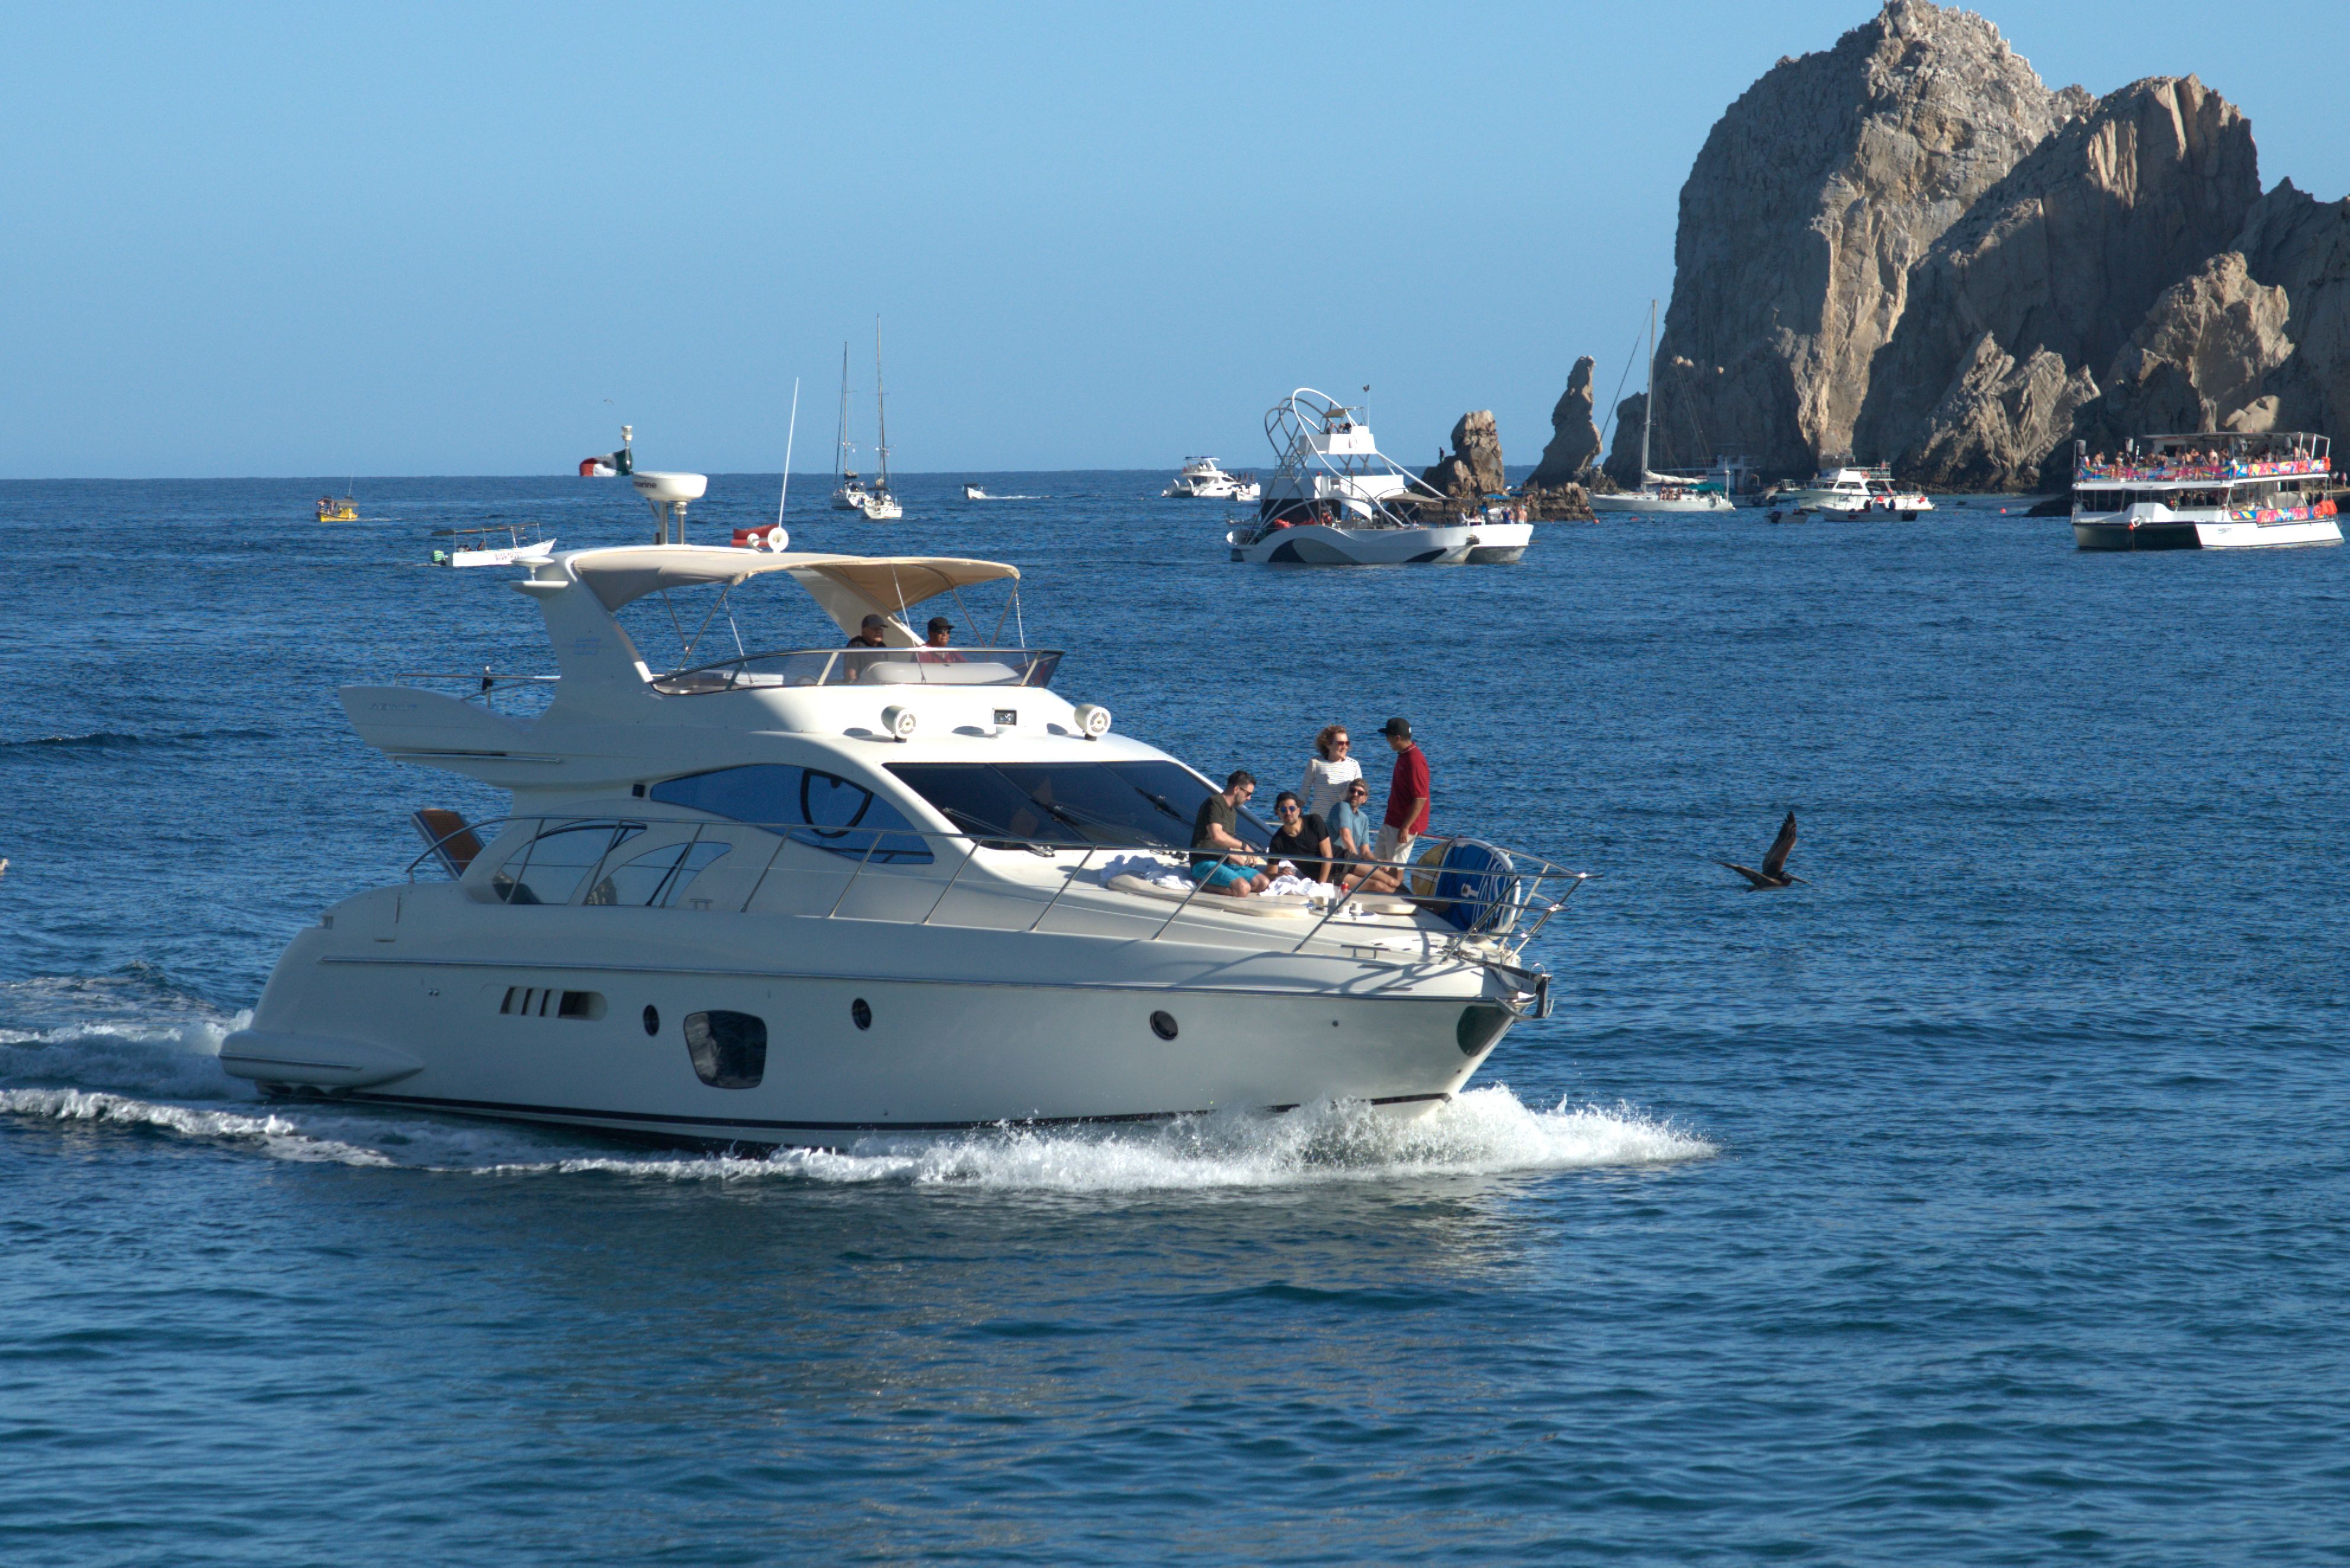 Cabo San Lucas Yachts Charters, Boat rentals, images pictures of yachts in cabo